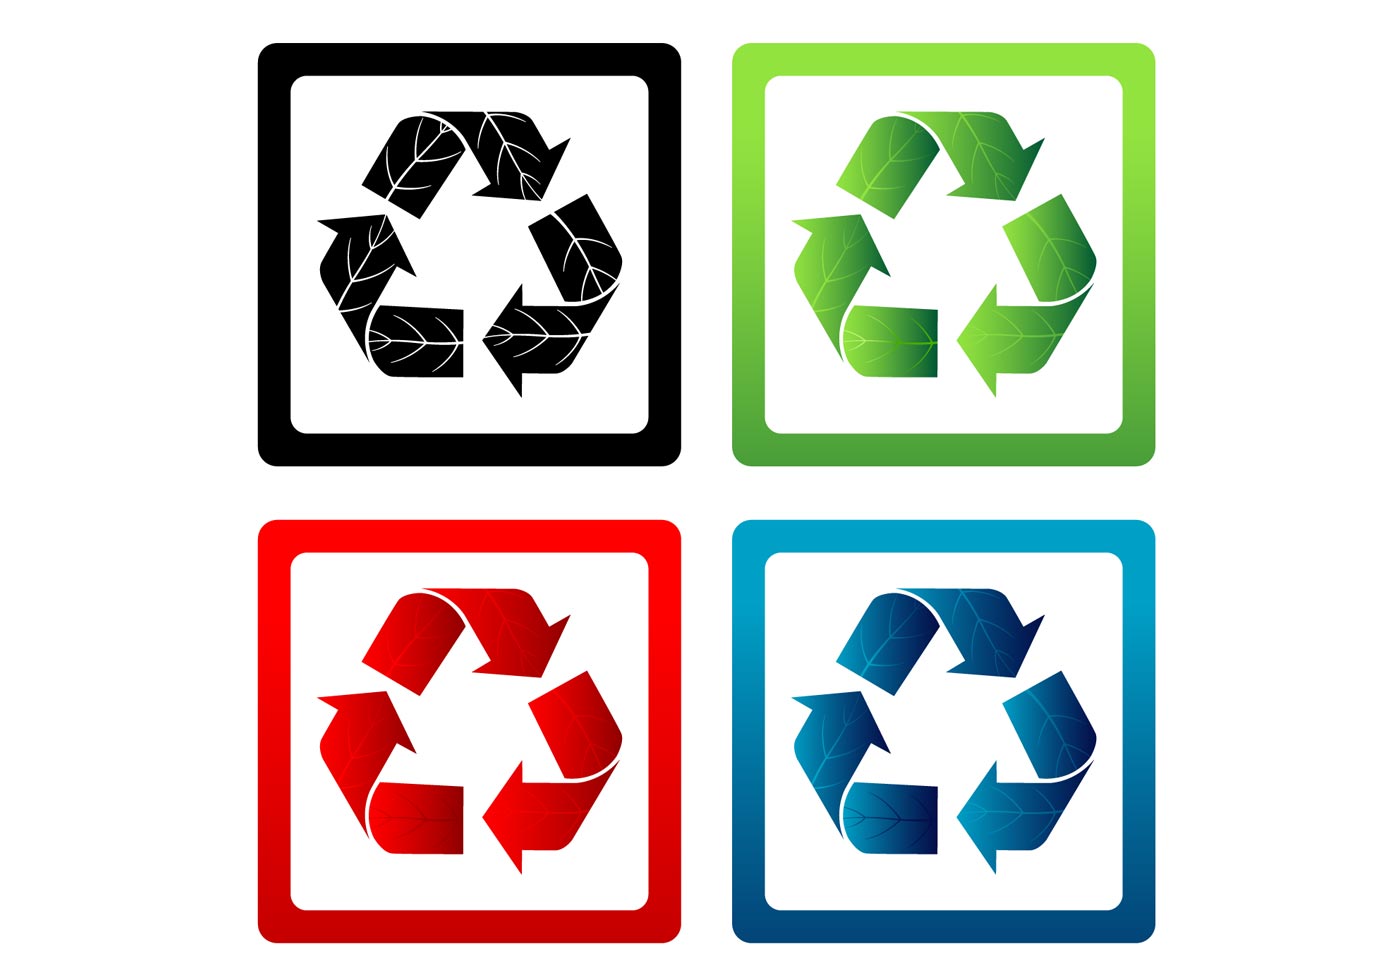 Recycle Free Vector Art - (1485 Free Downloads)